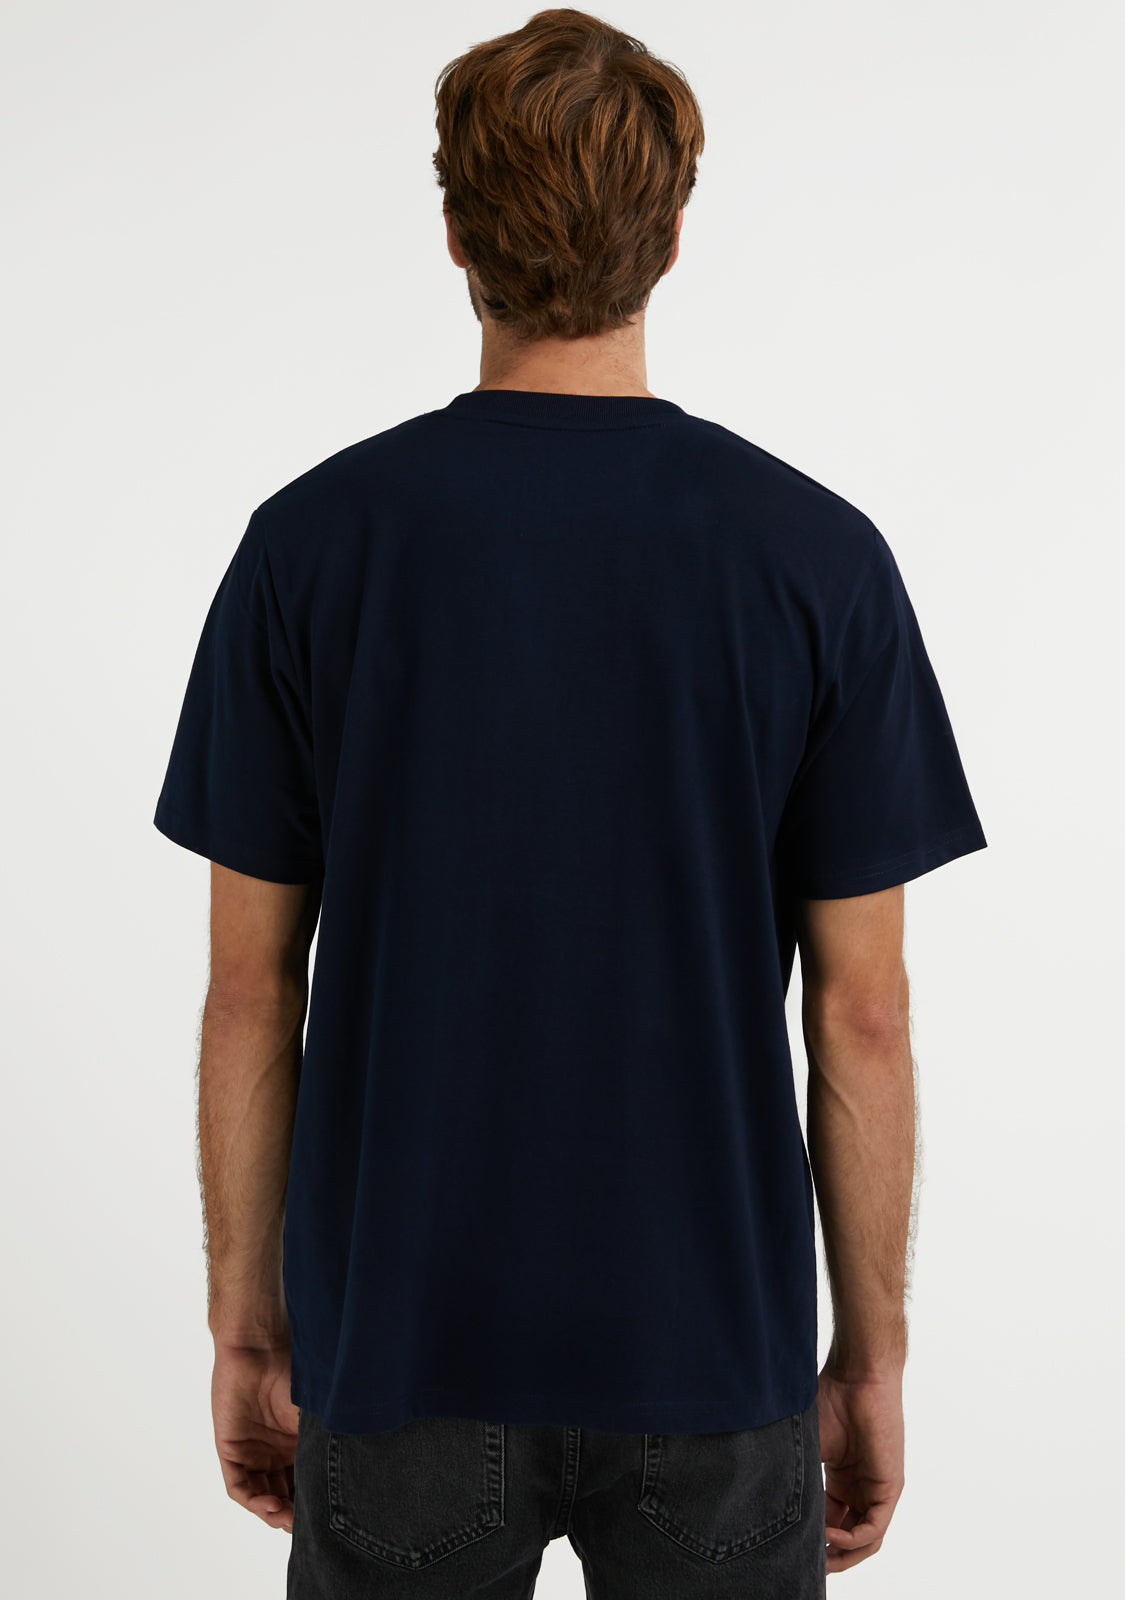 Unstoppable T-Shirt Navy